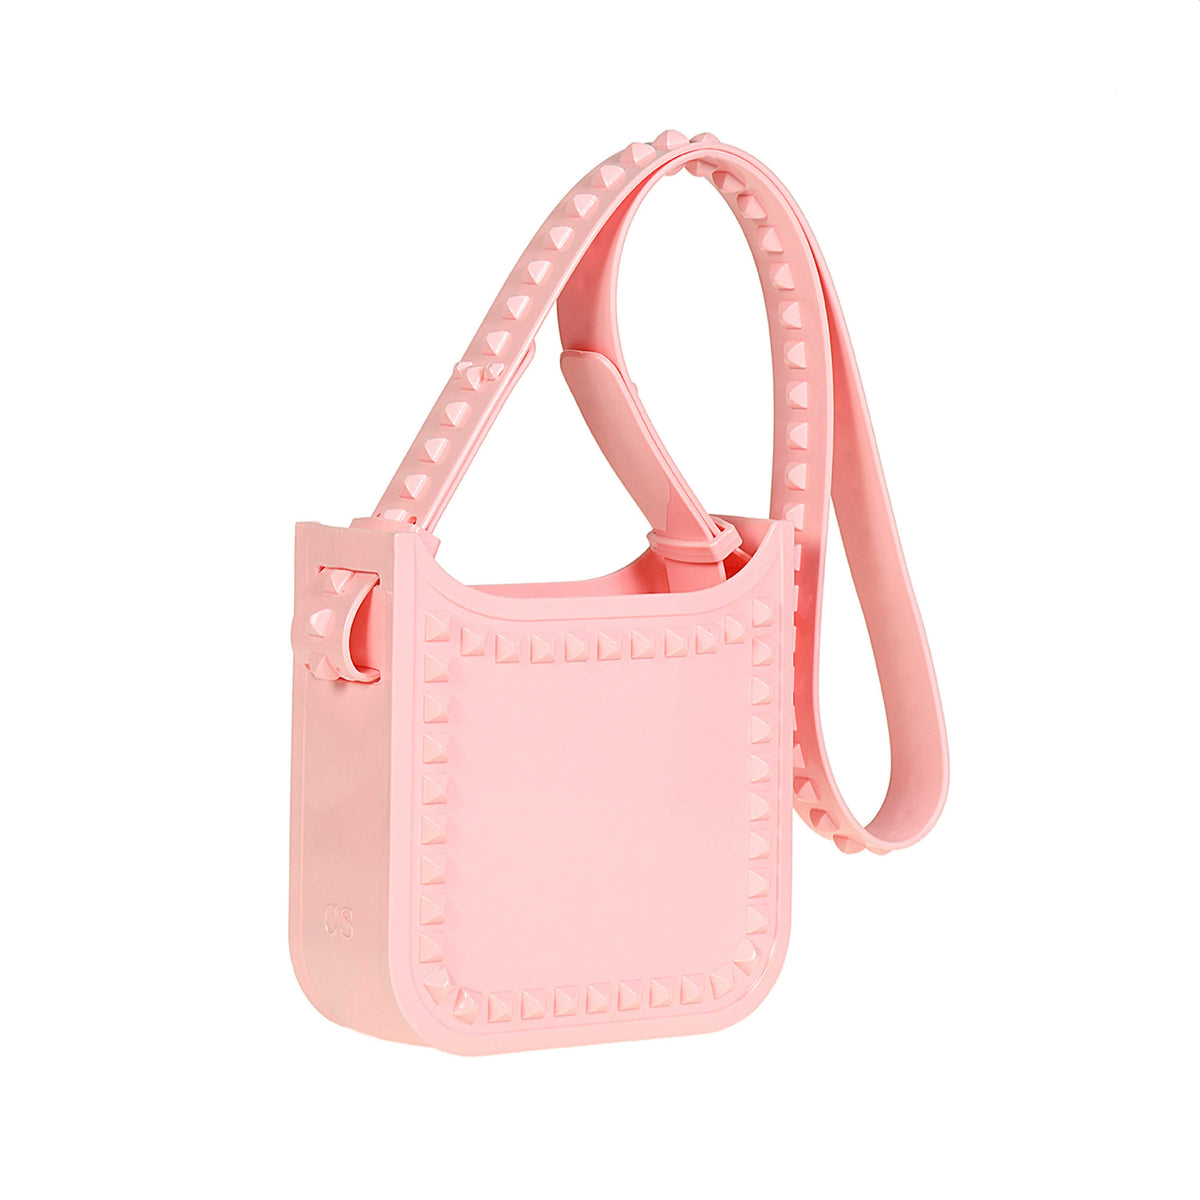 Waterproof purse with studs especially perfect for the beach in color baby pink